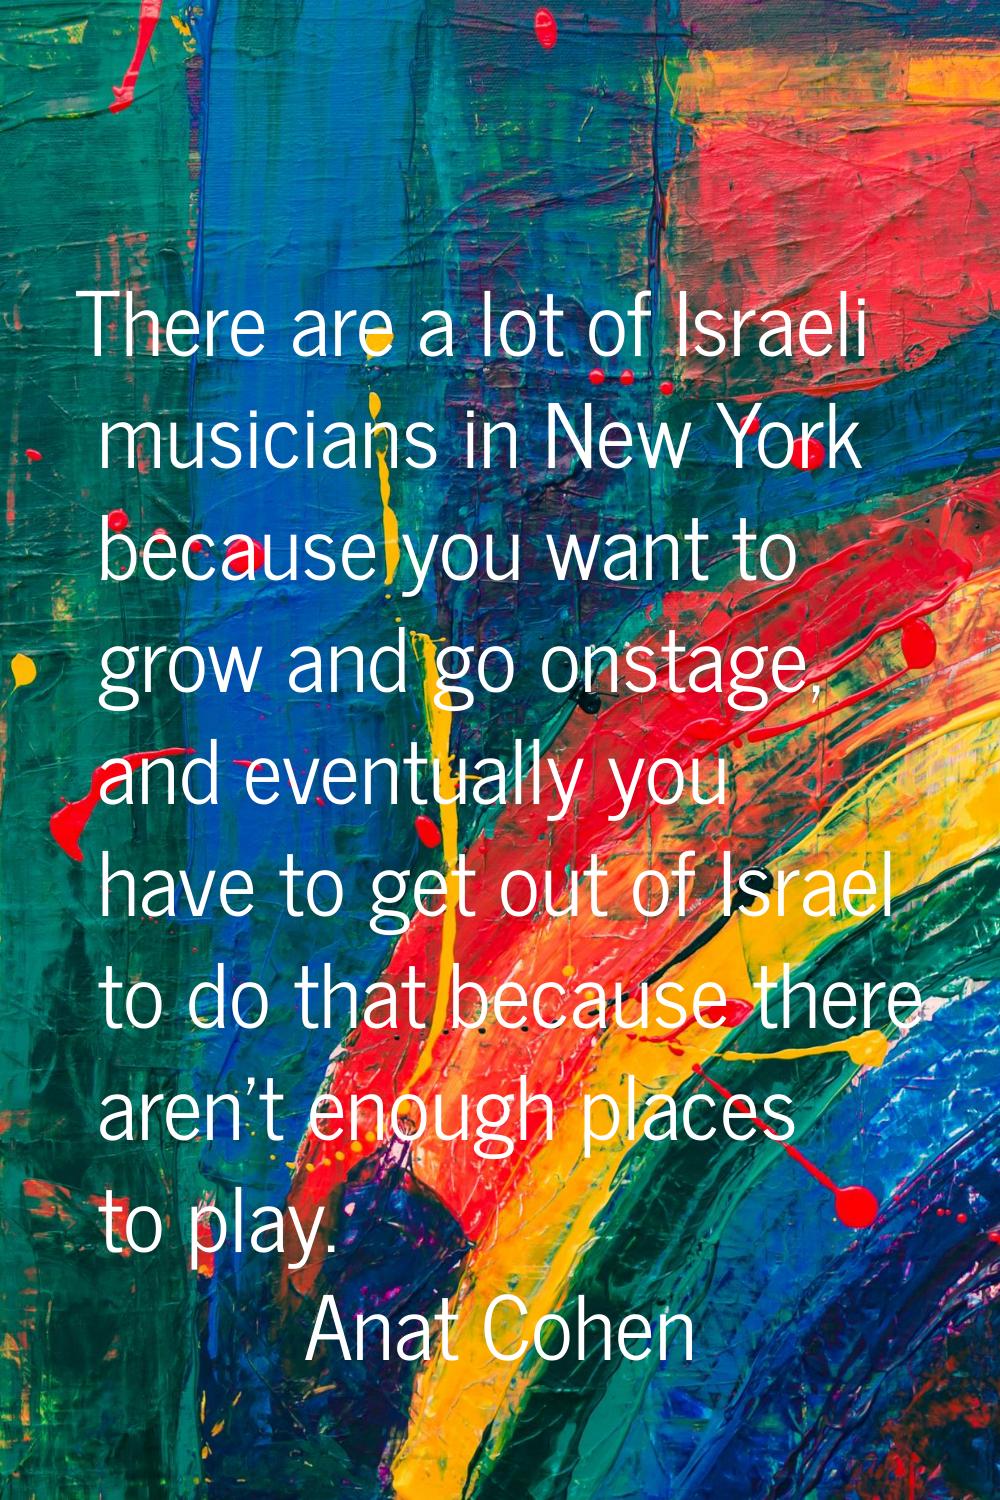 There are a lot of Israeli musicians in New York because you want to grow and go onstage, and event